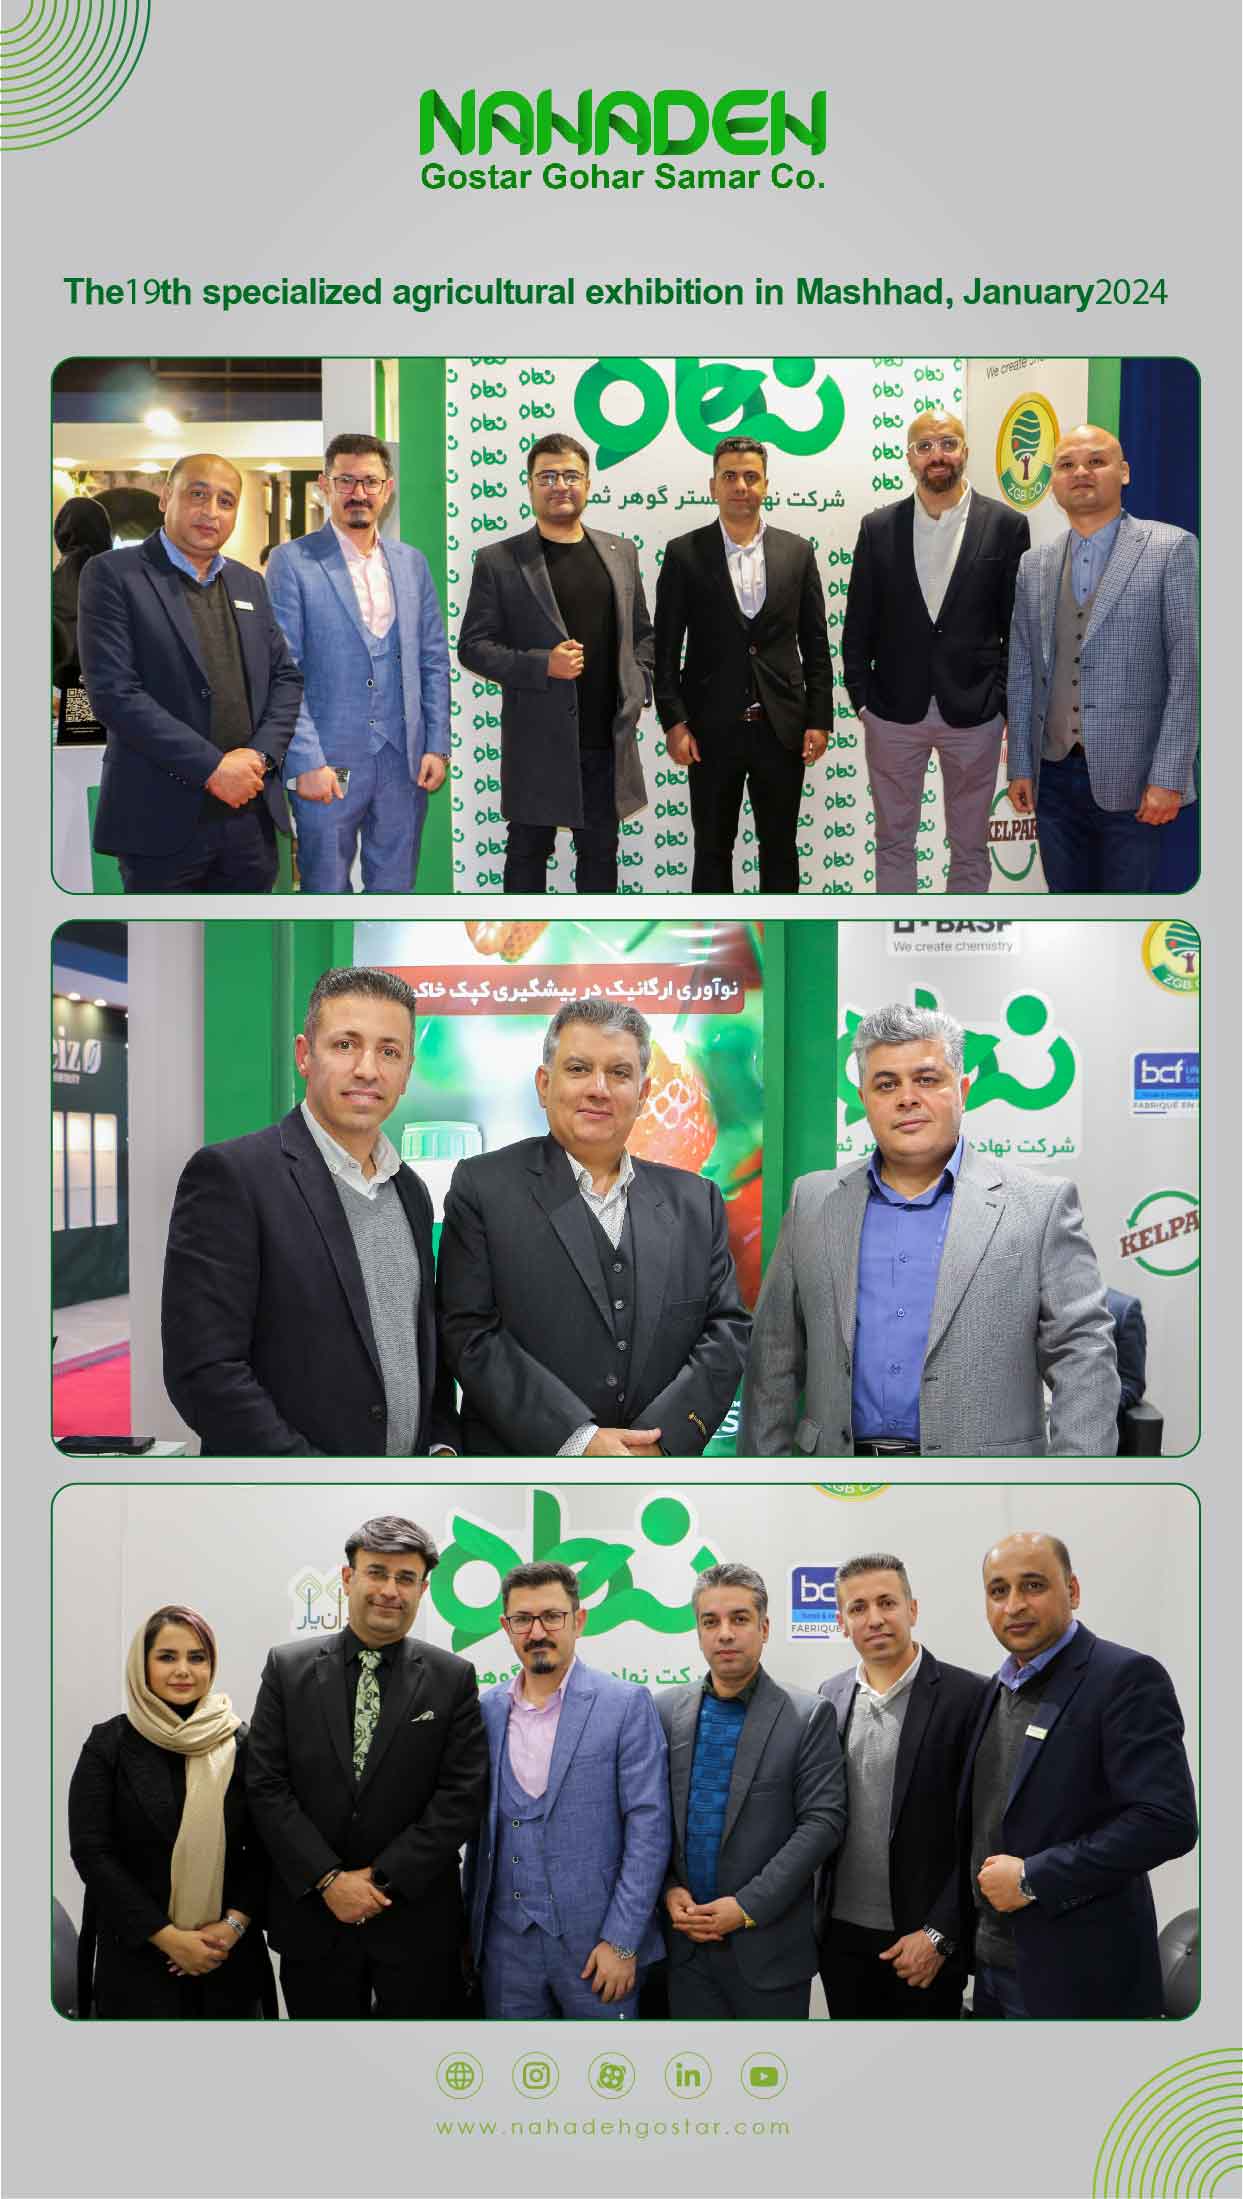 The 19th specialized agricultural exhibition in Mashhad, January 2024